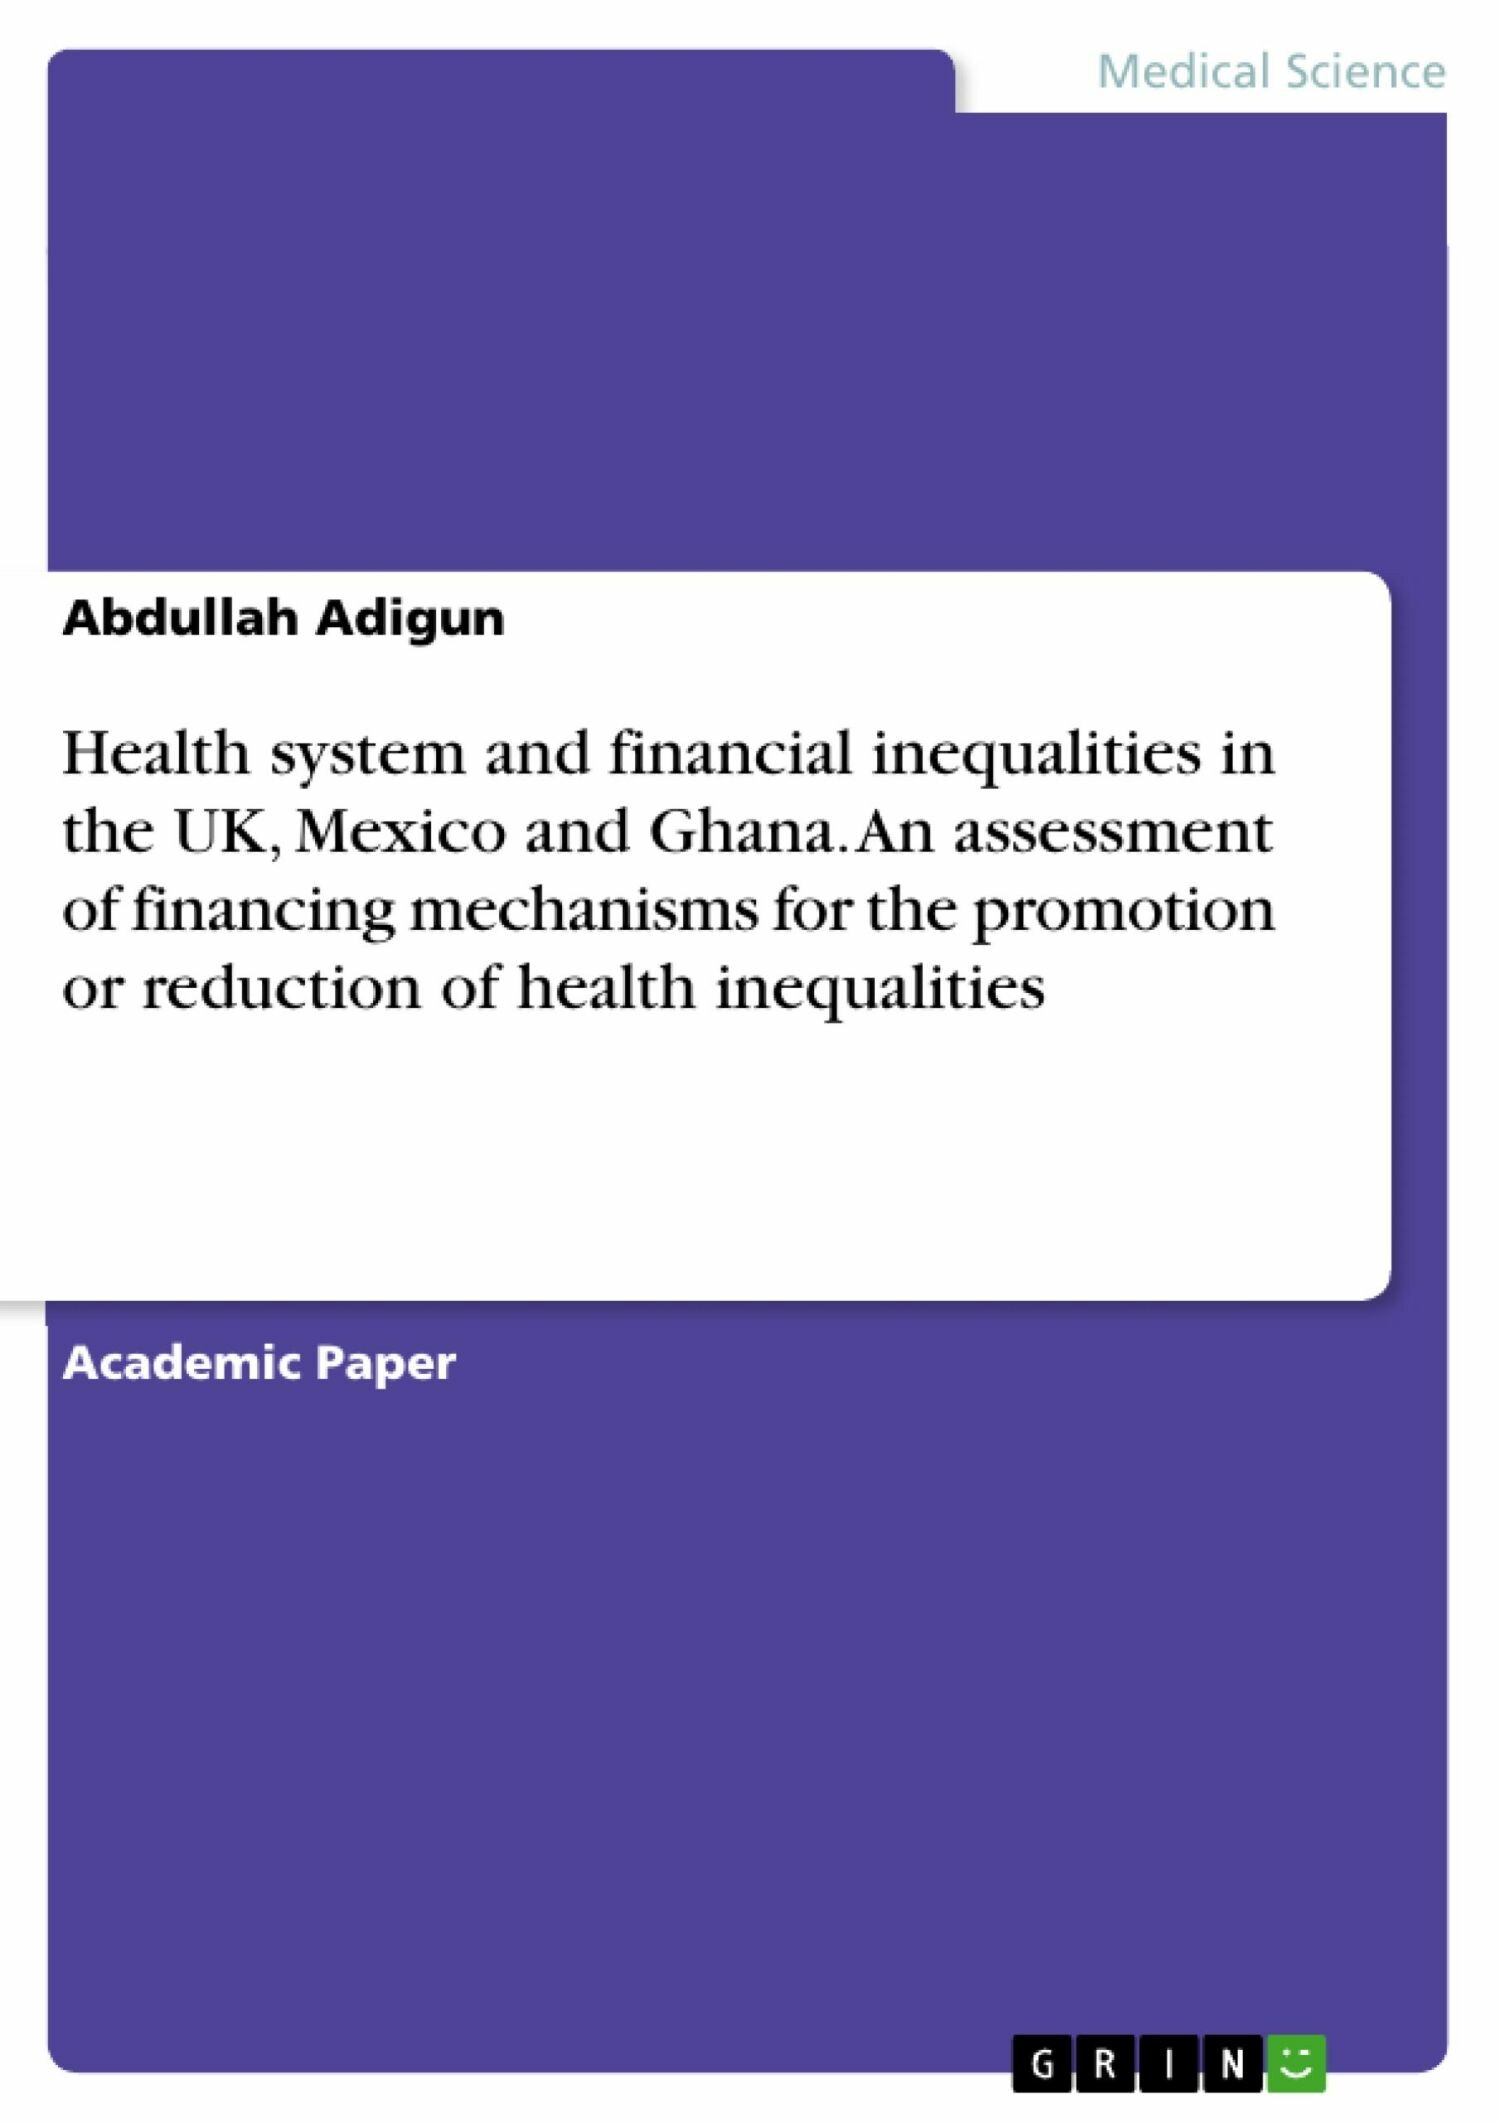 Health system and financial inequalities in the UK, Mexico and Ghana. An assessment of financing mechanisms for the promotion or reduction of health inequalities